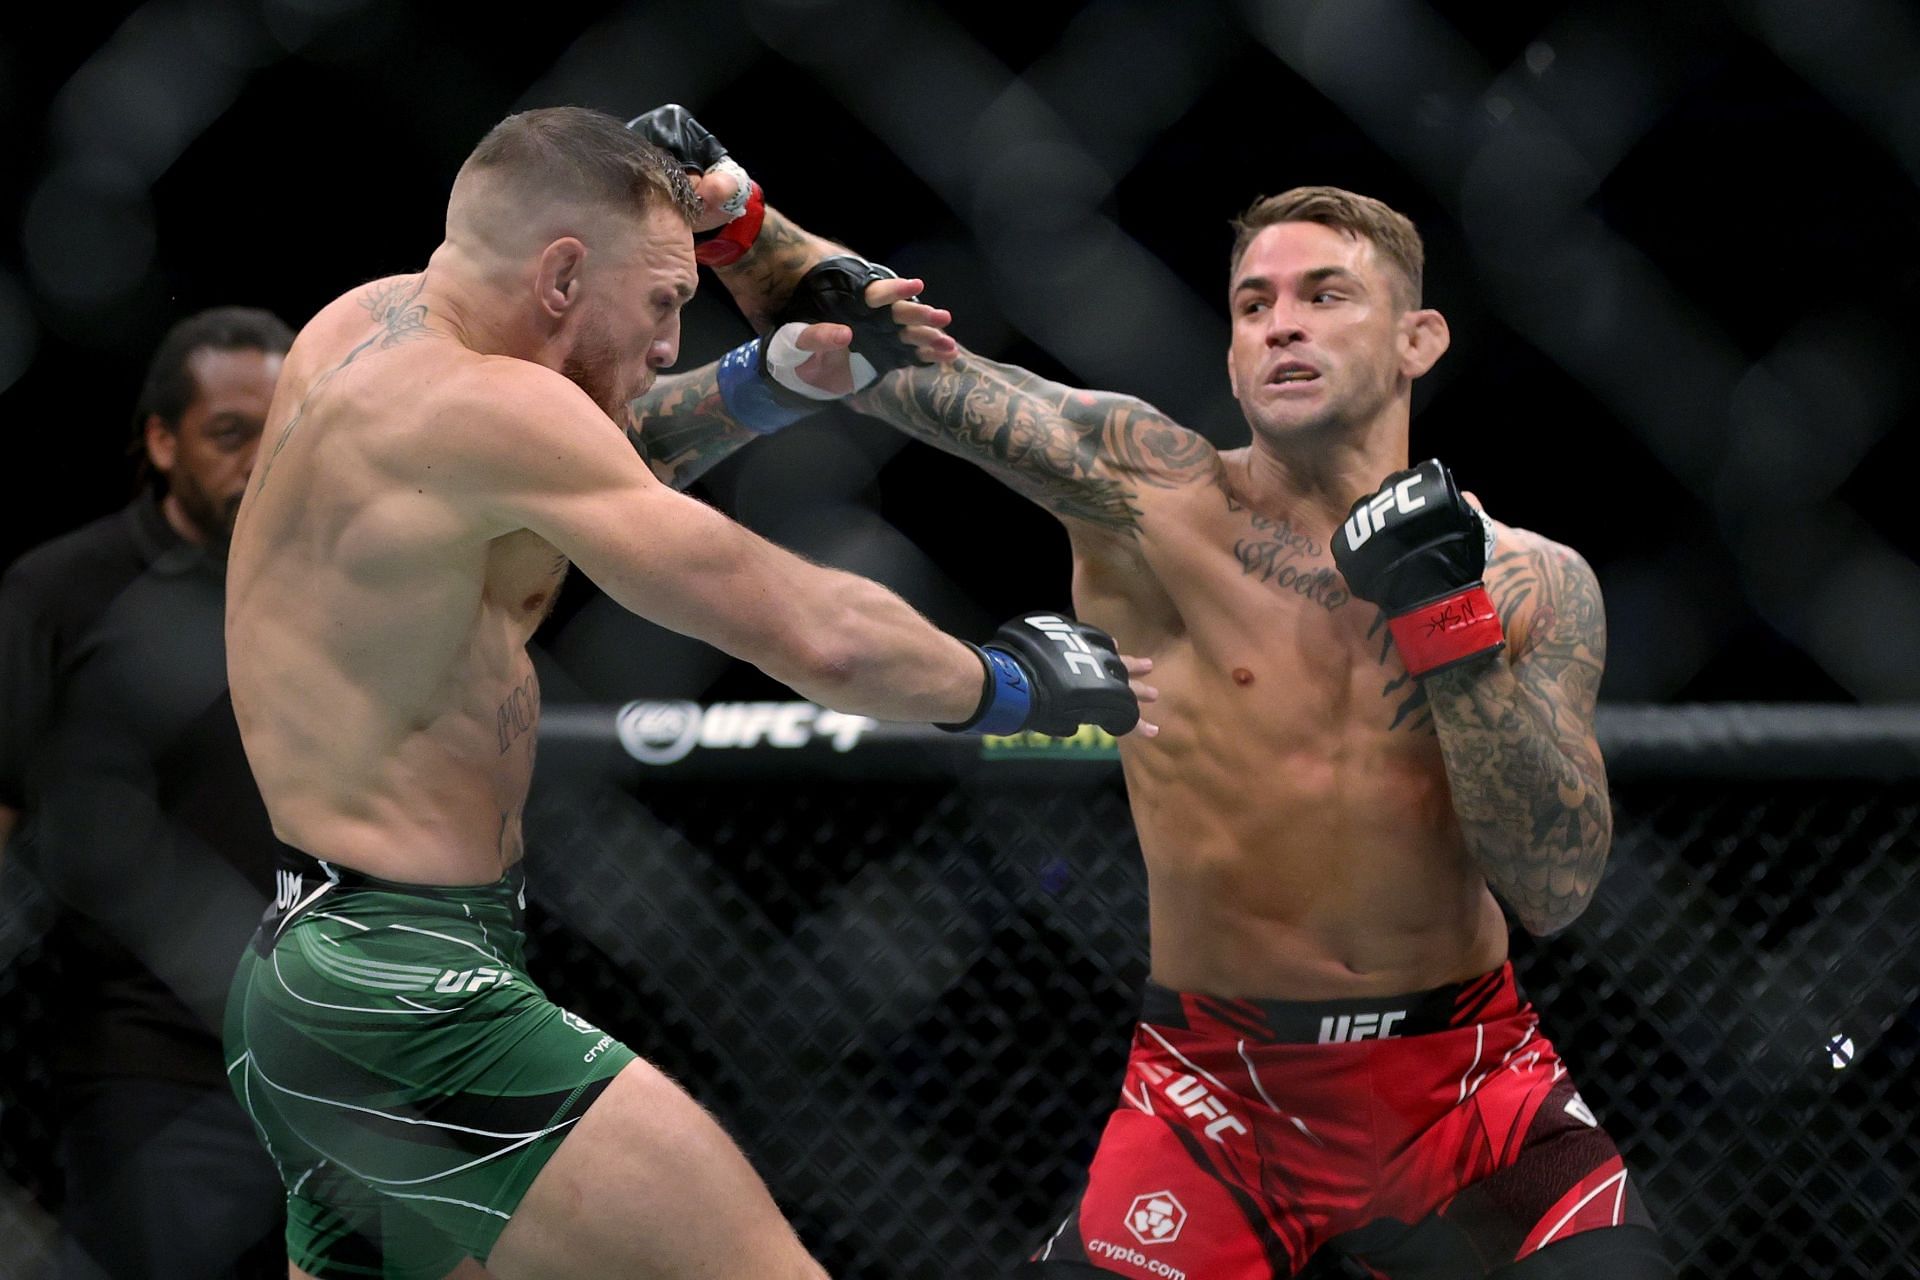 Dustin Poirier has defeated Conor McGregor on two occasions this year